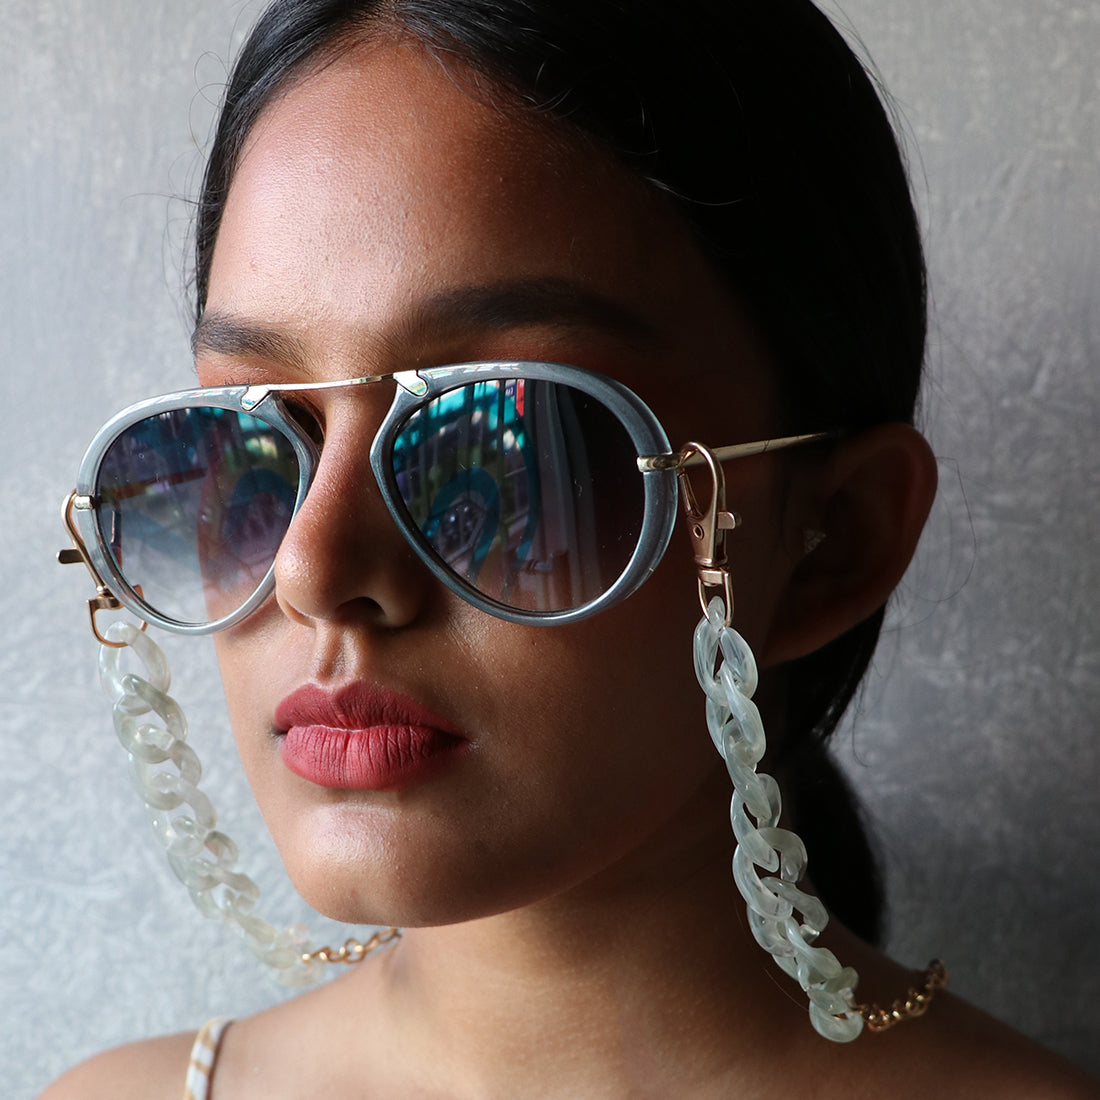 METALLIC GOLD-TONED CHAIN-LINK MARBLE OLIVE GREEN ACRYLIC MASK CHAIN OR SUNGLASS CHAIN